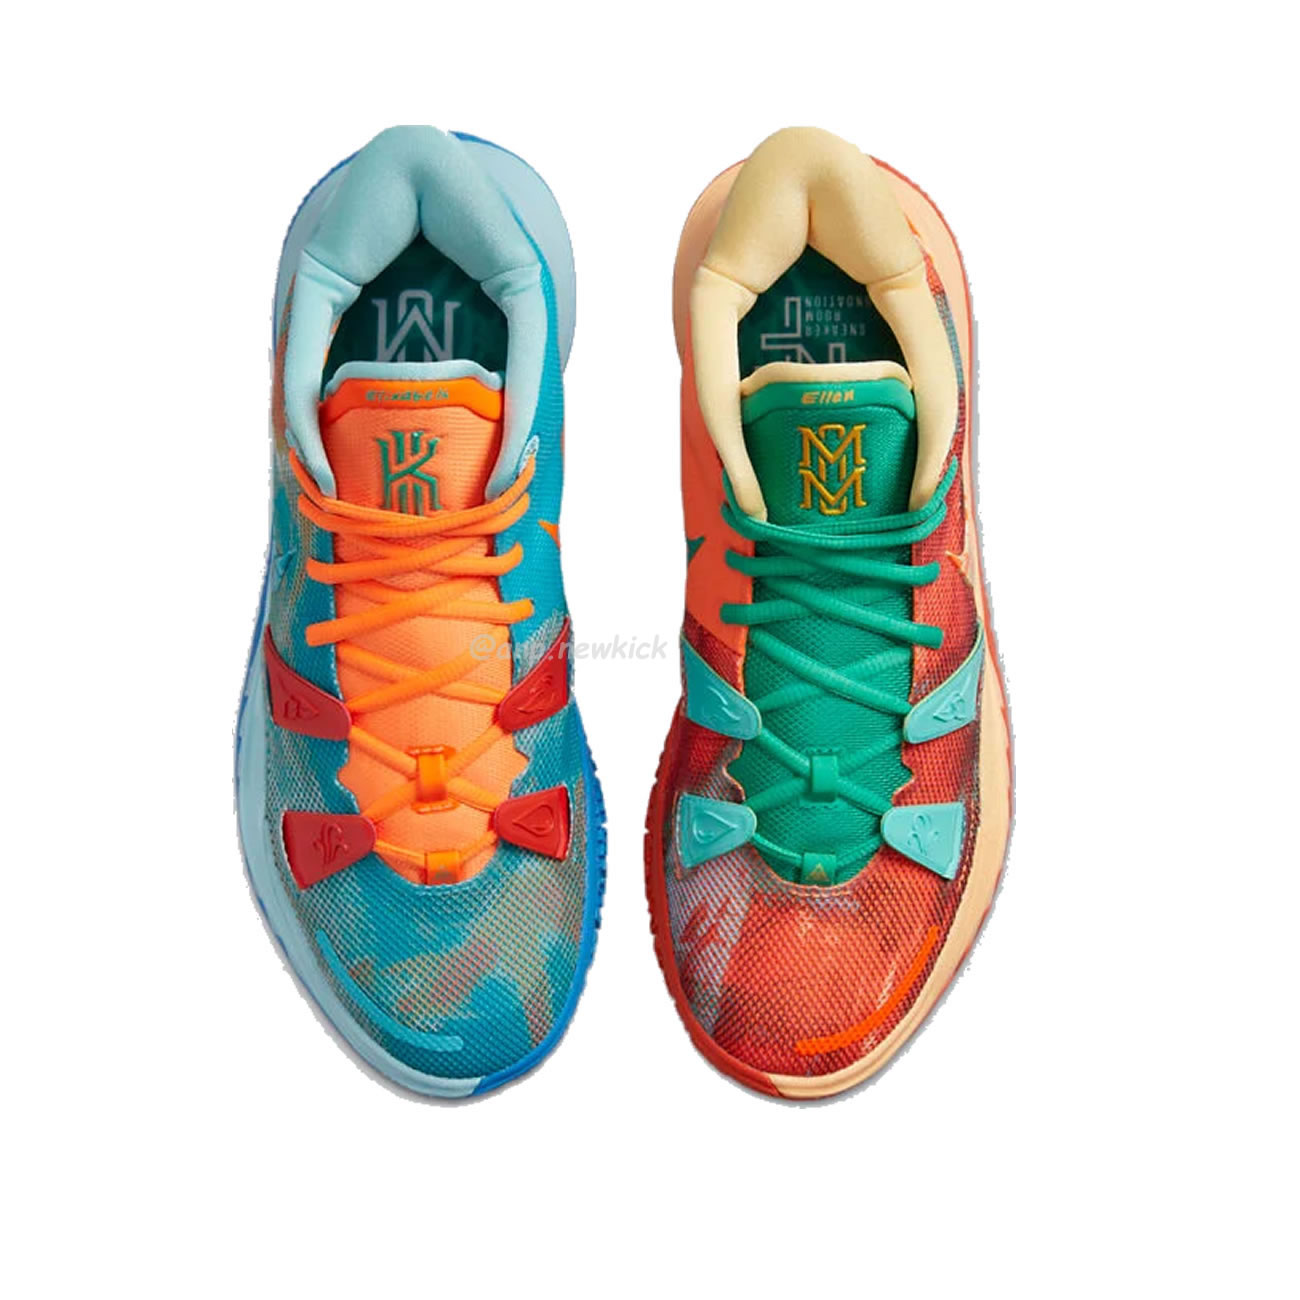 Nike Kyrie 7 Sneaker Room Fire And Water Do5360 900 (17) - newkick.org